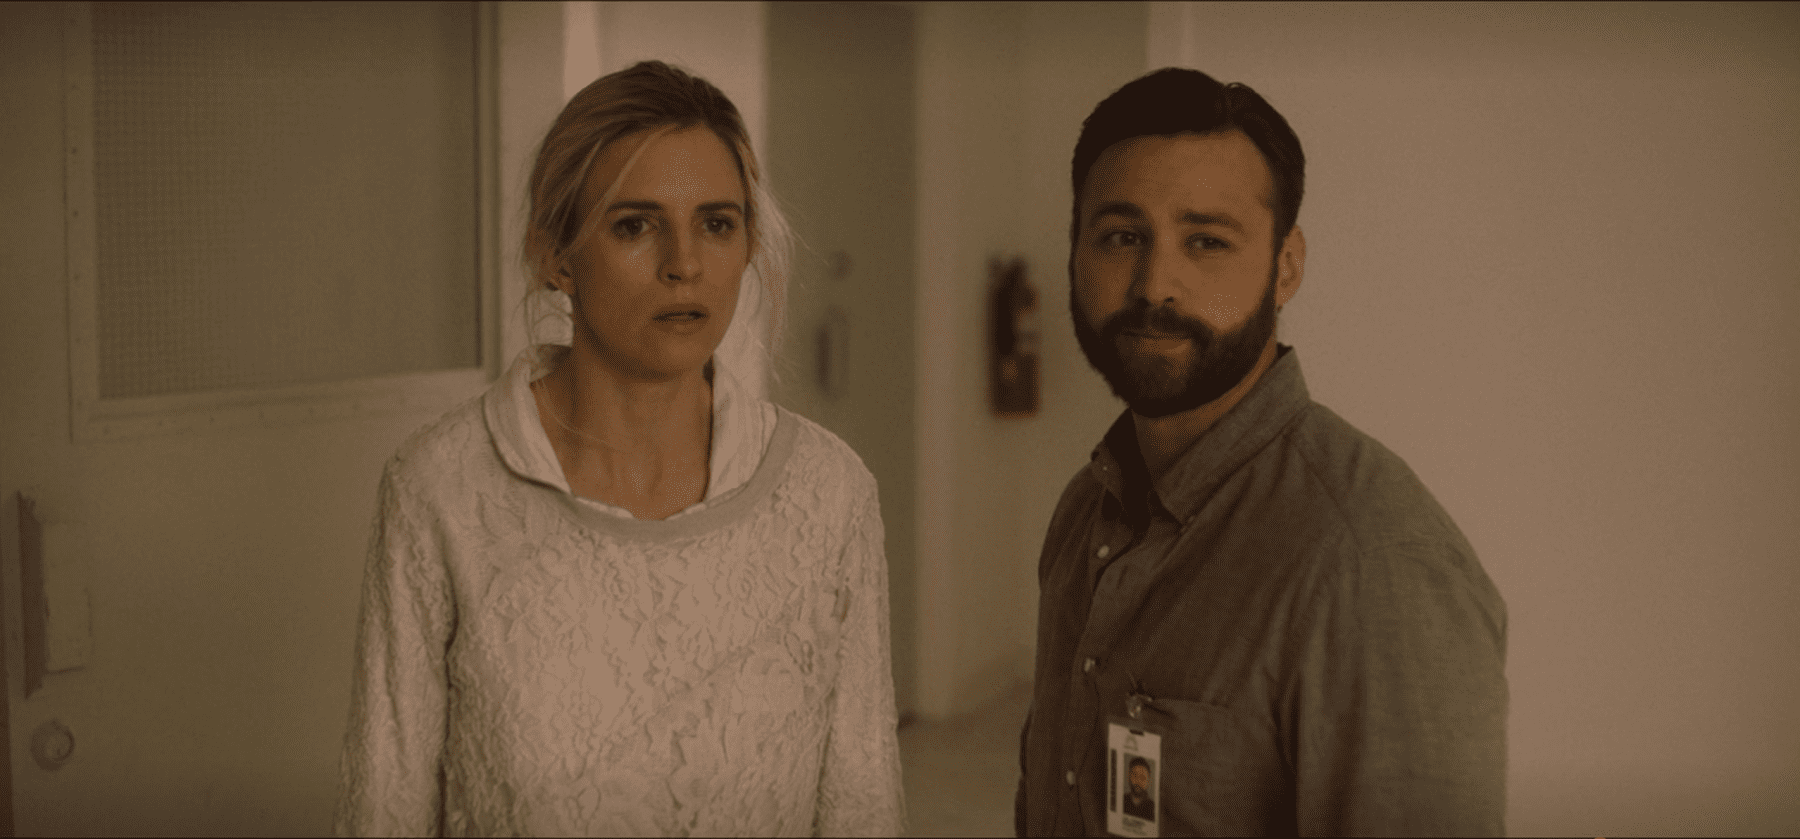 Prairie with a Dr. Homer Roberts who does not remember her in The OA